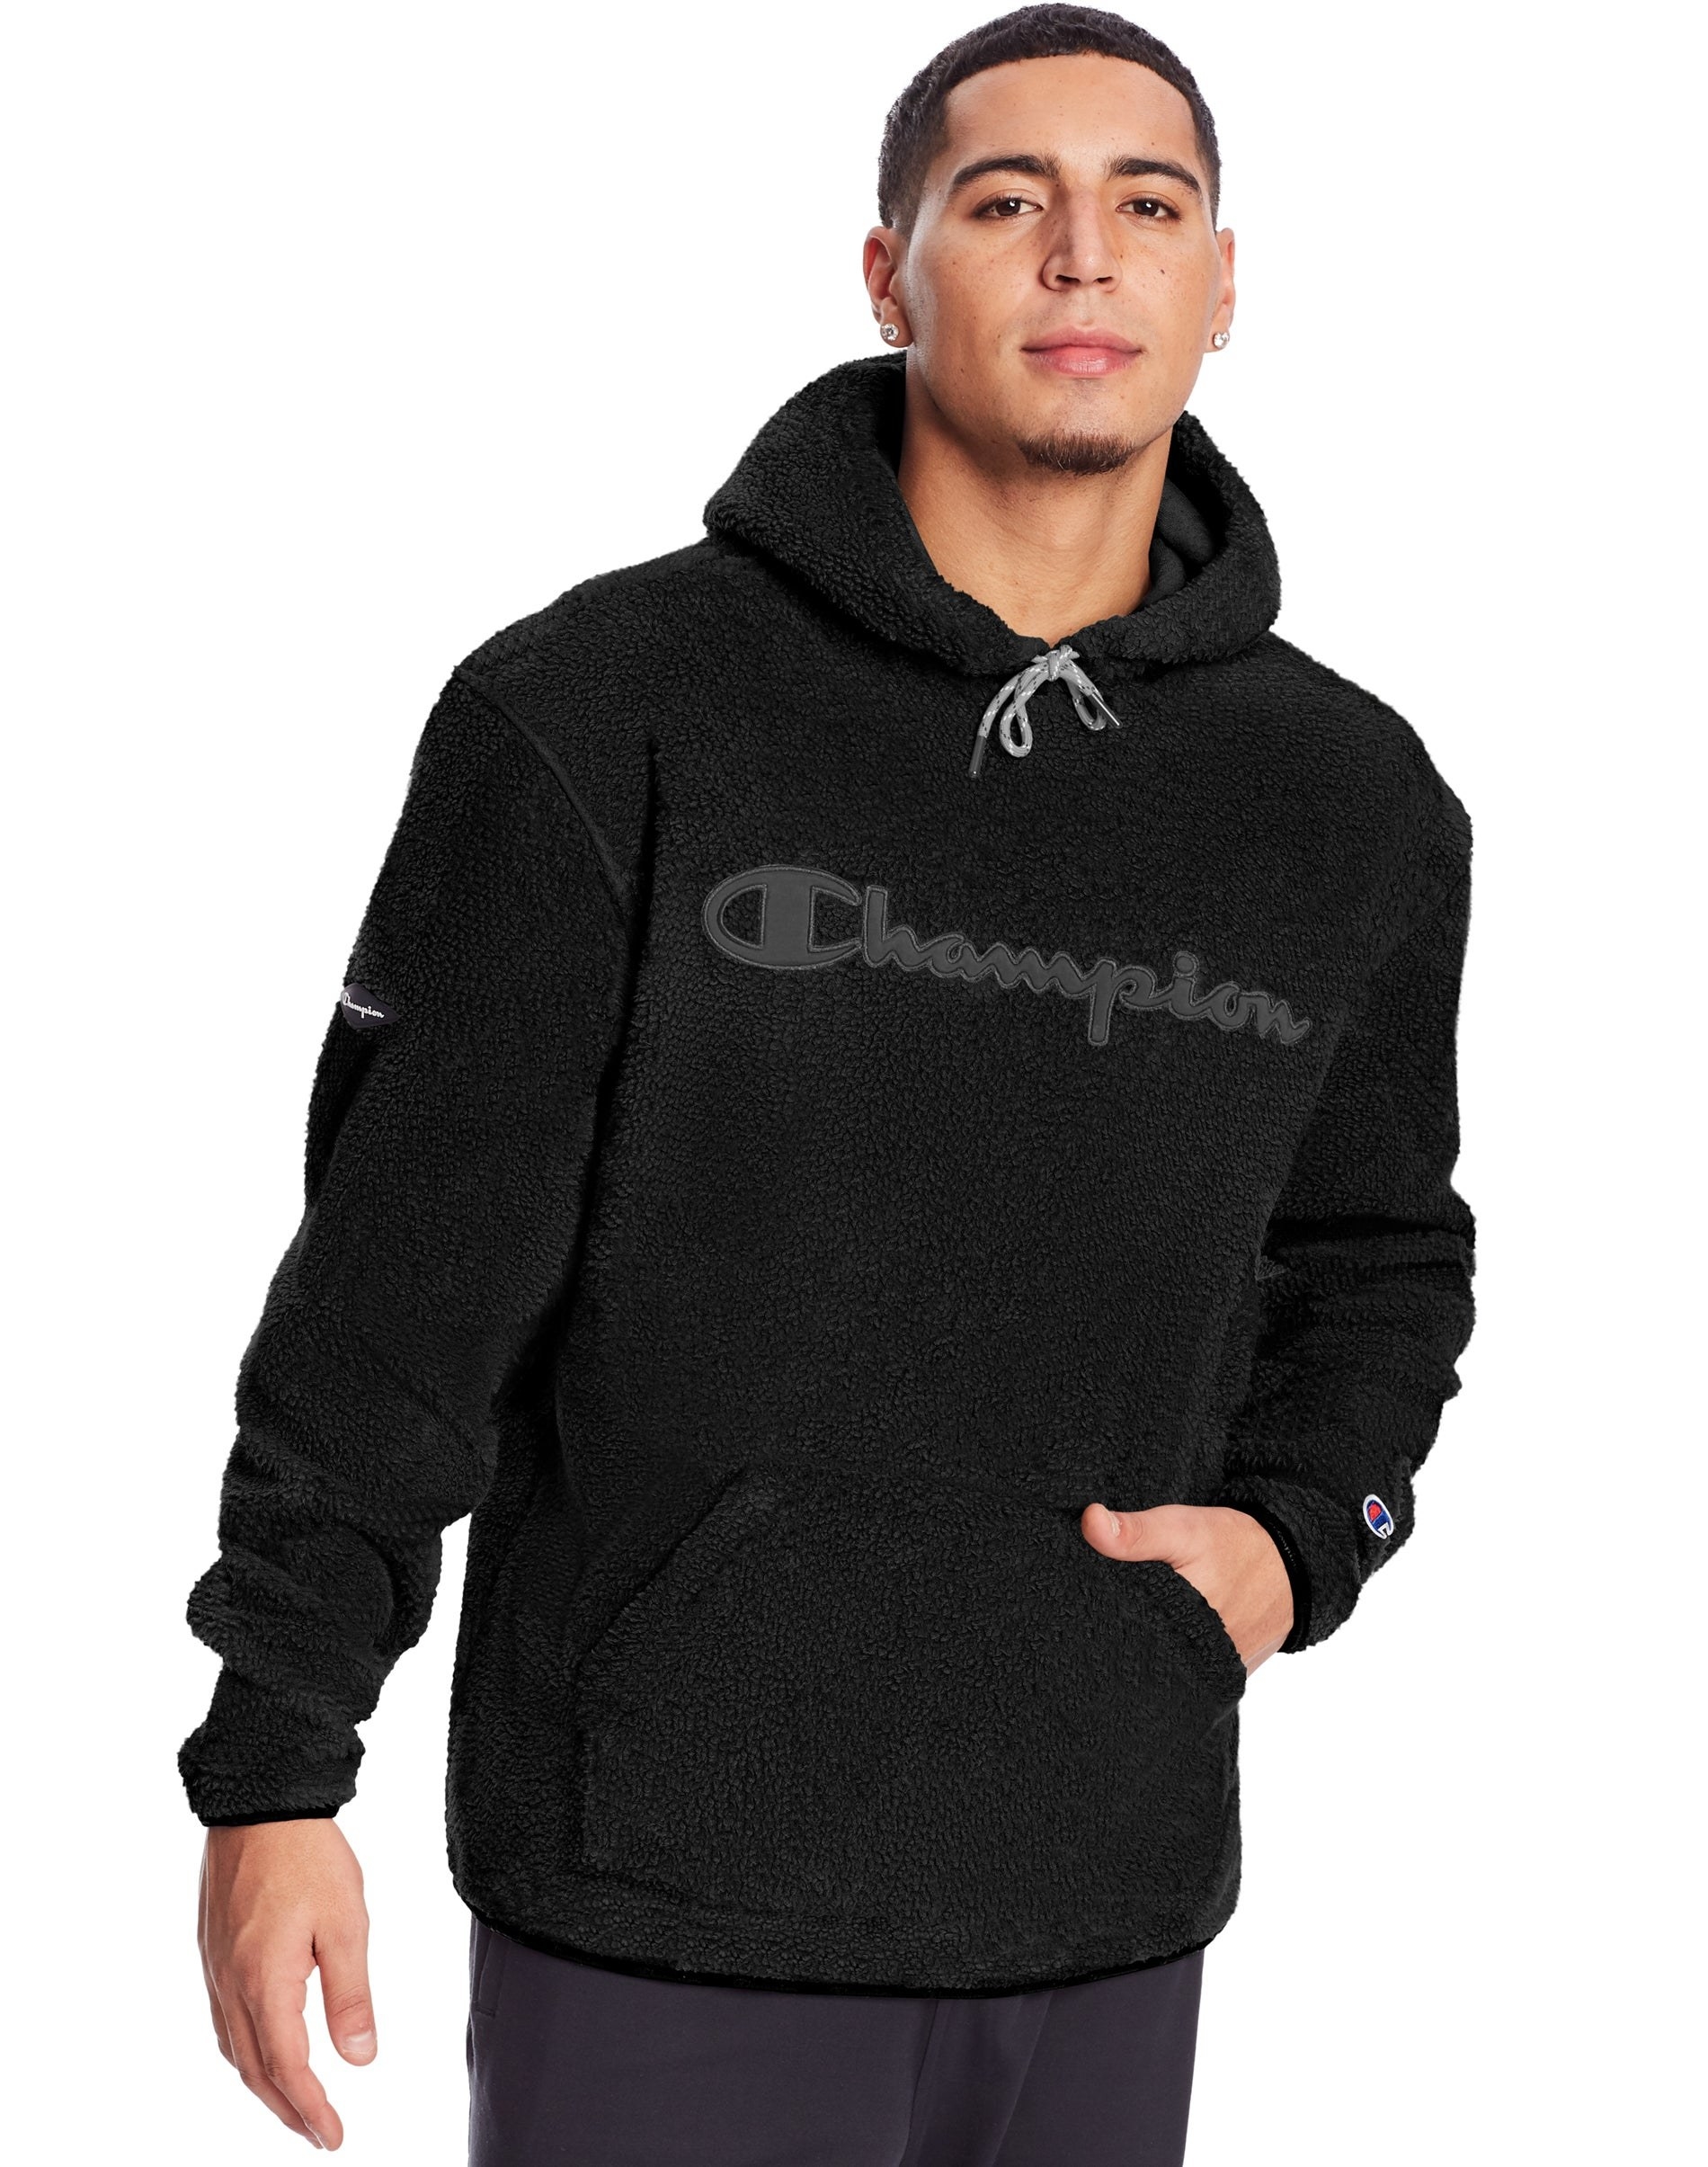 person wearing a black sherpa hoodie with &quot;champion&quot; on it